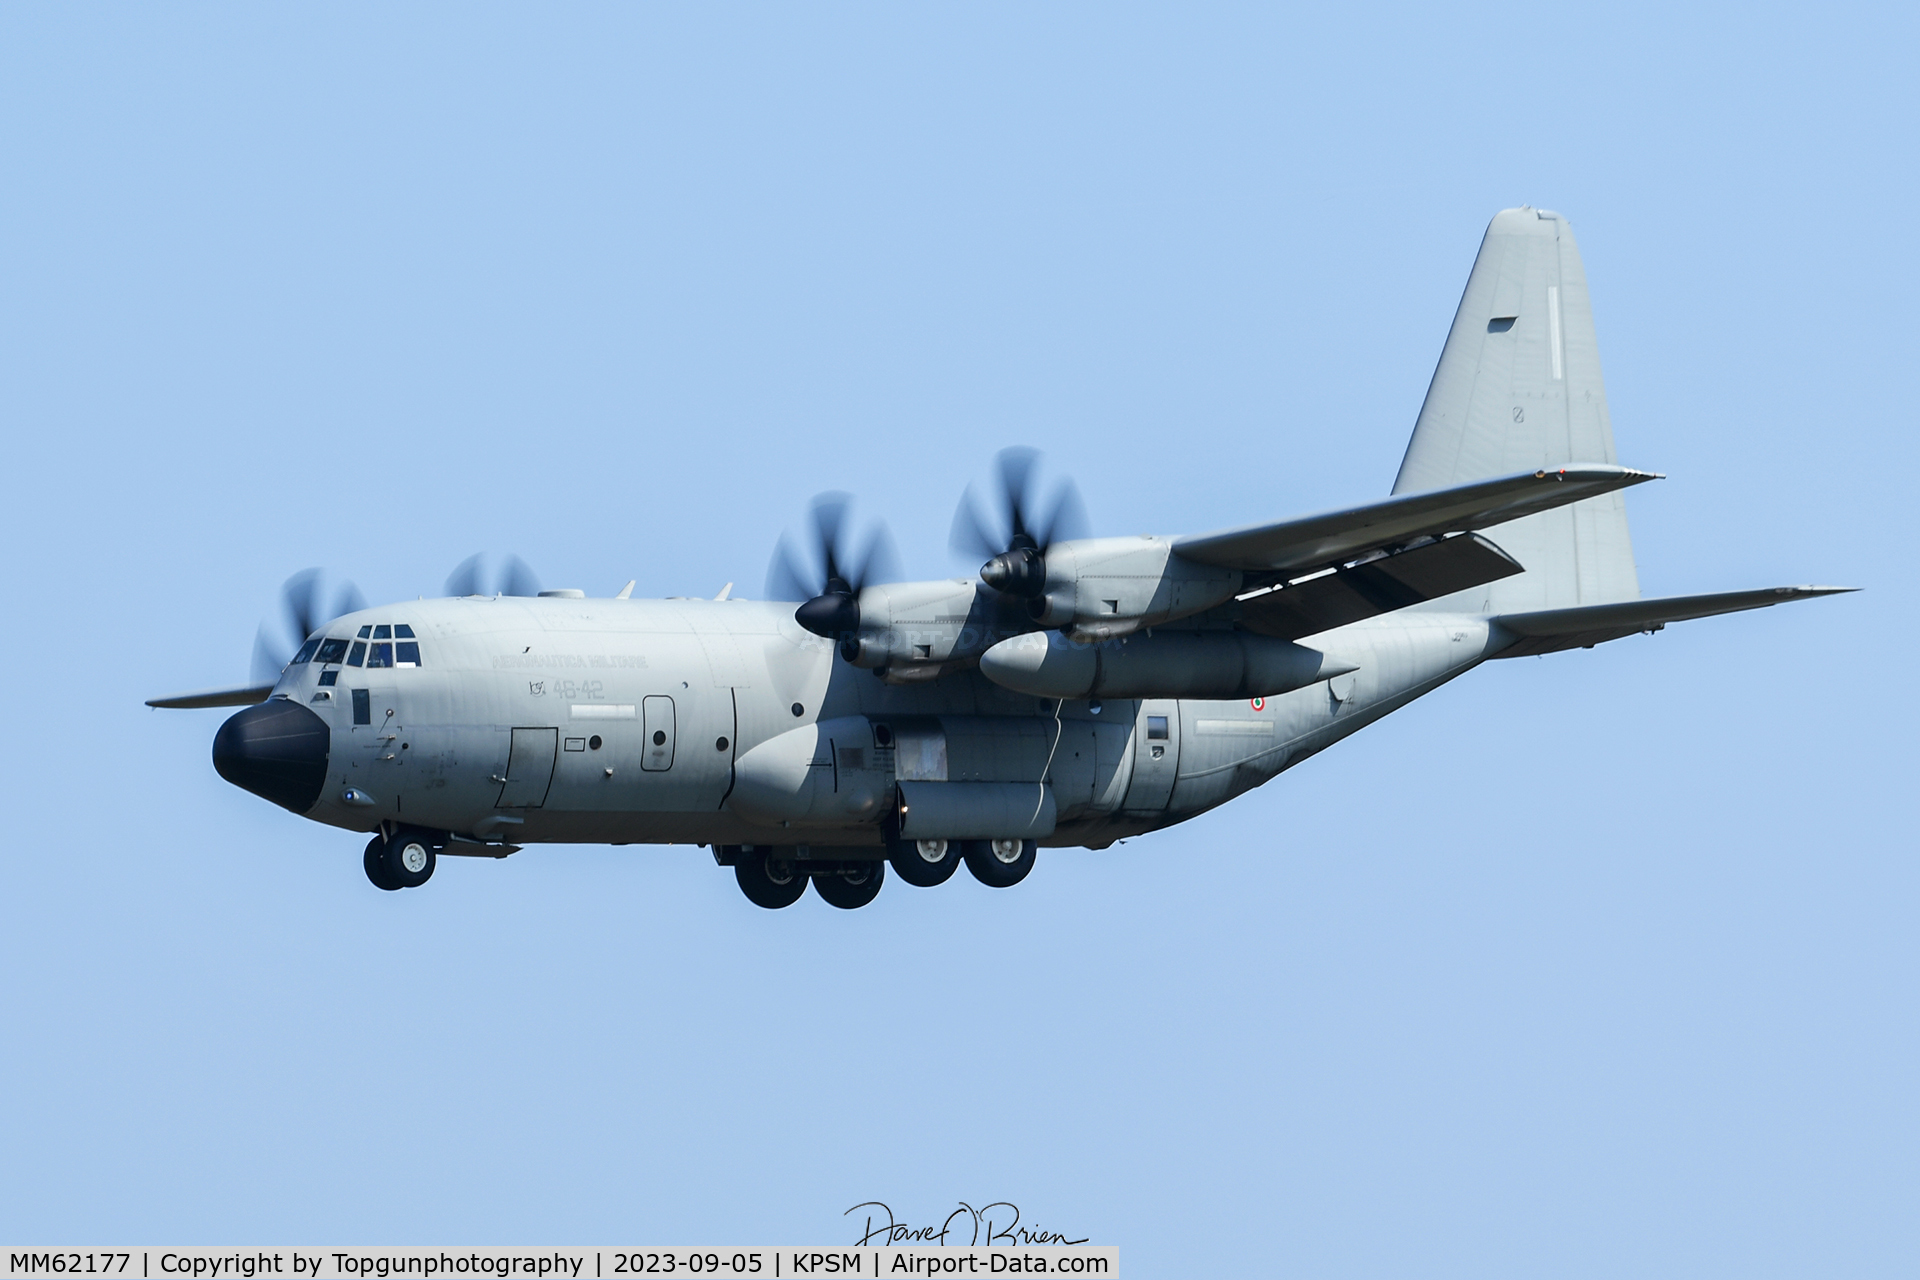 MM62177, Lockheed Martin C-130J-30 Super Hercules C/N 382-5498, IAM4682 stops in for gas and customs